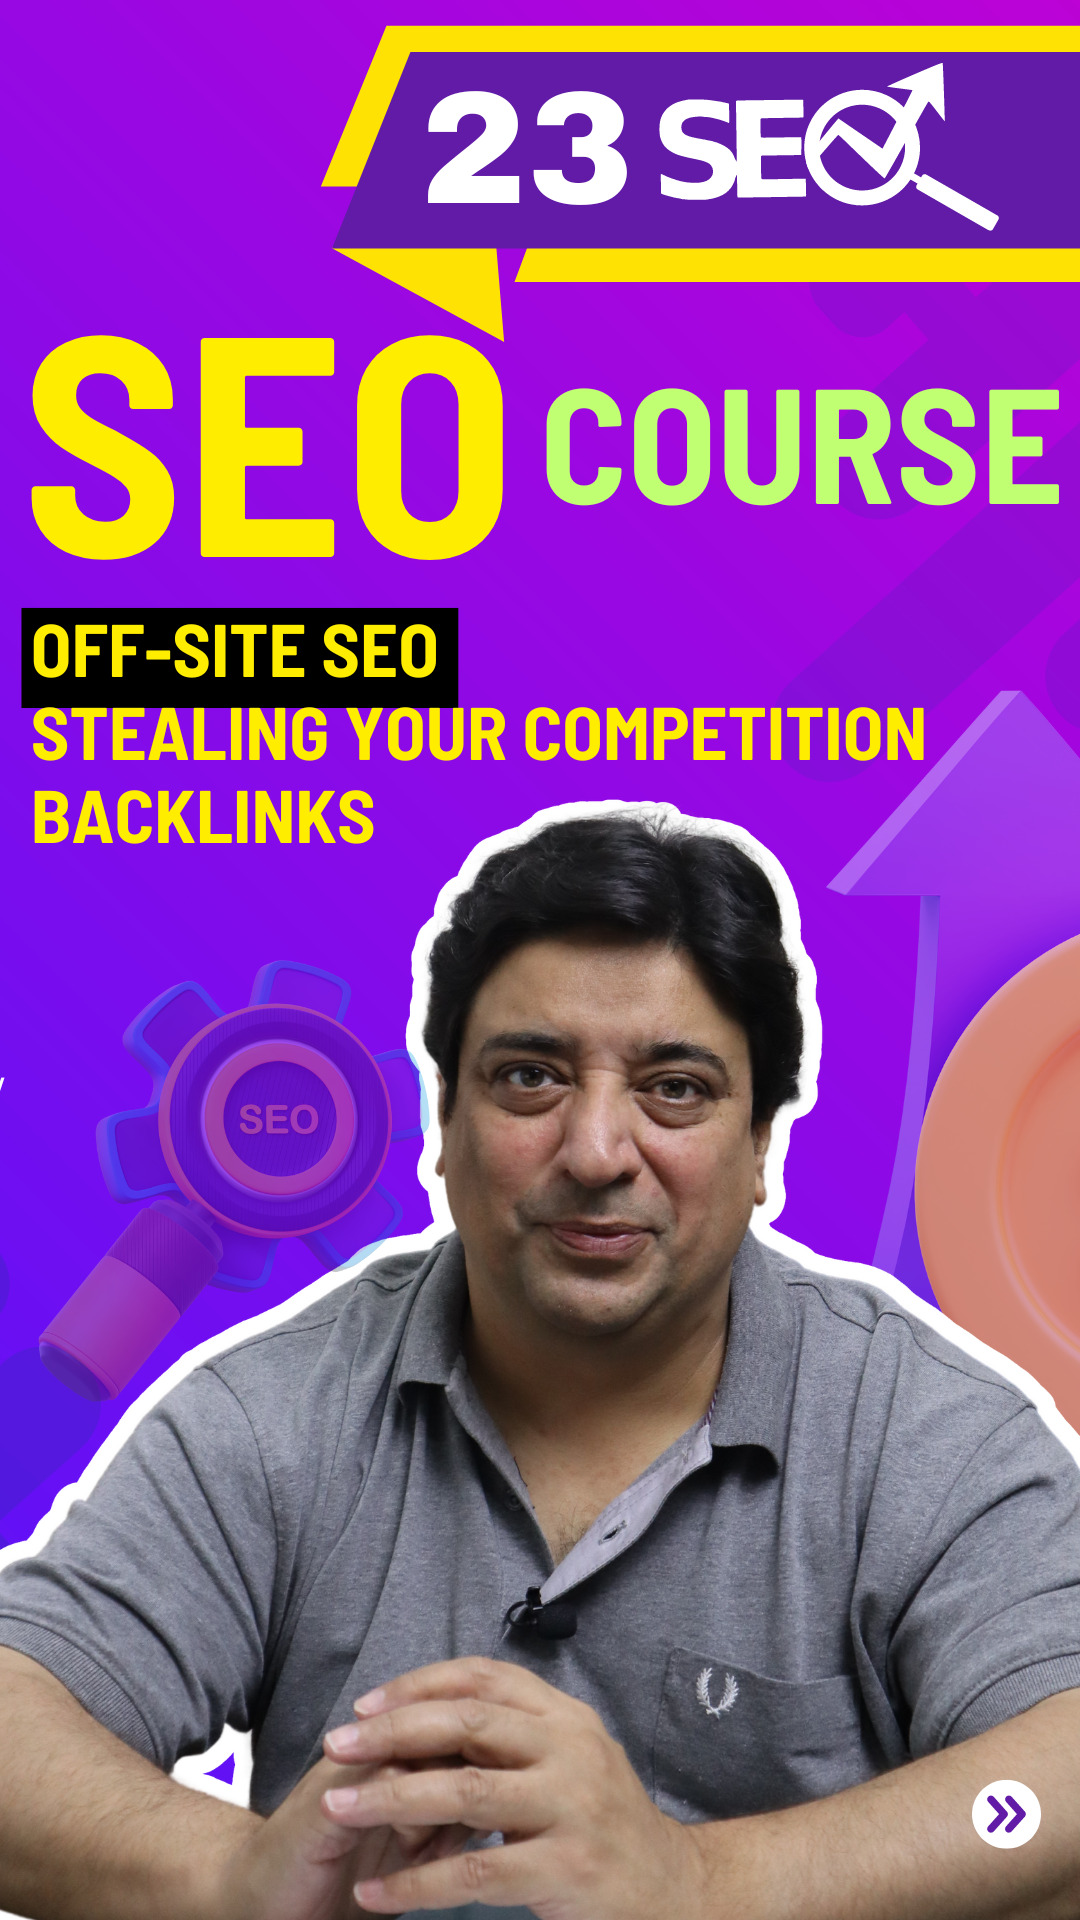 How to Steal Competitors Backlinks Off-Site SEO